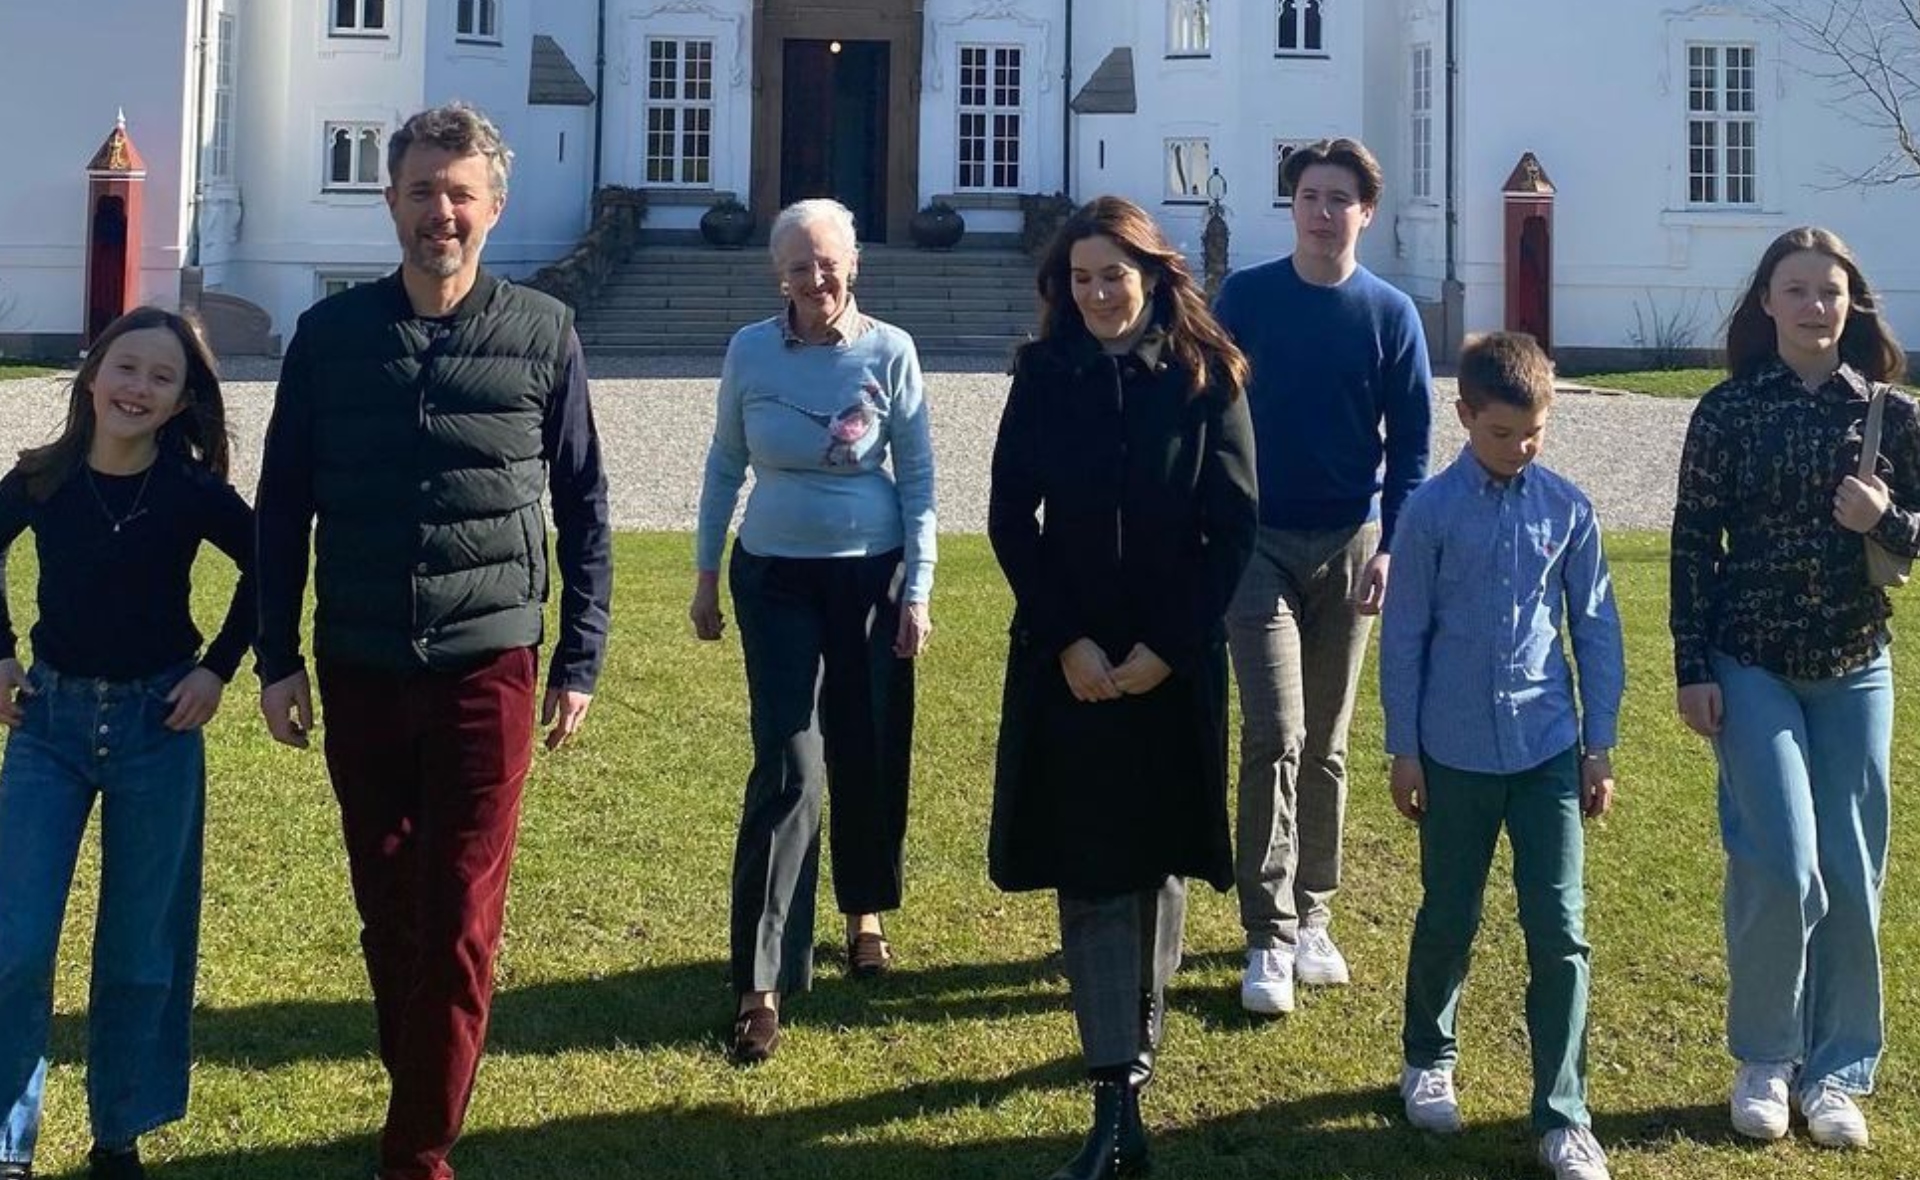 After months apart, Crown Princess Mary and her family are reunited with Queen Margrethe in time for Easter